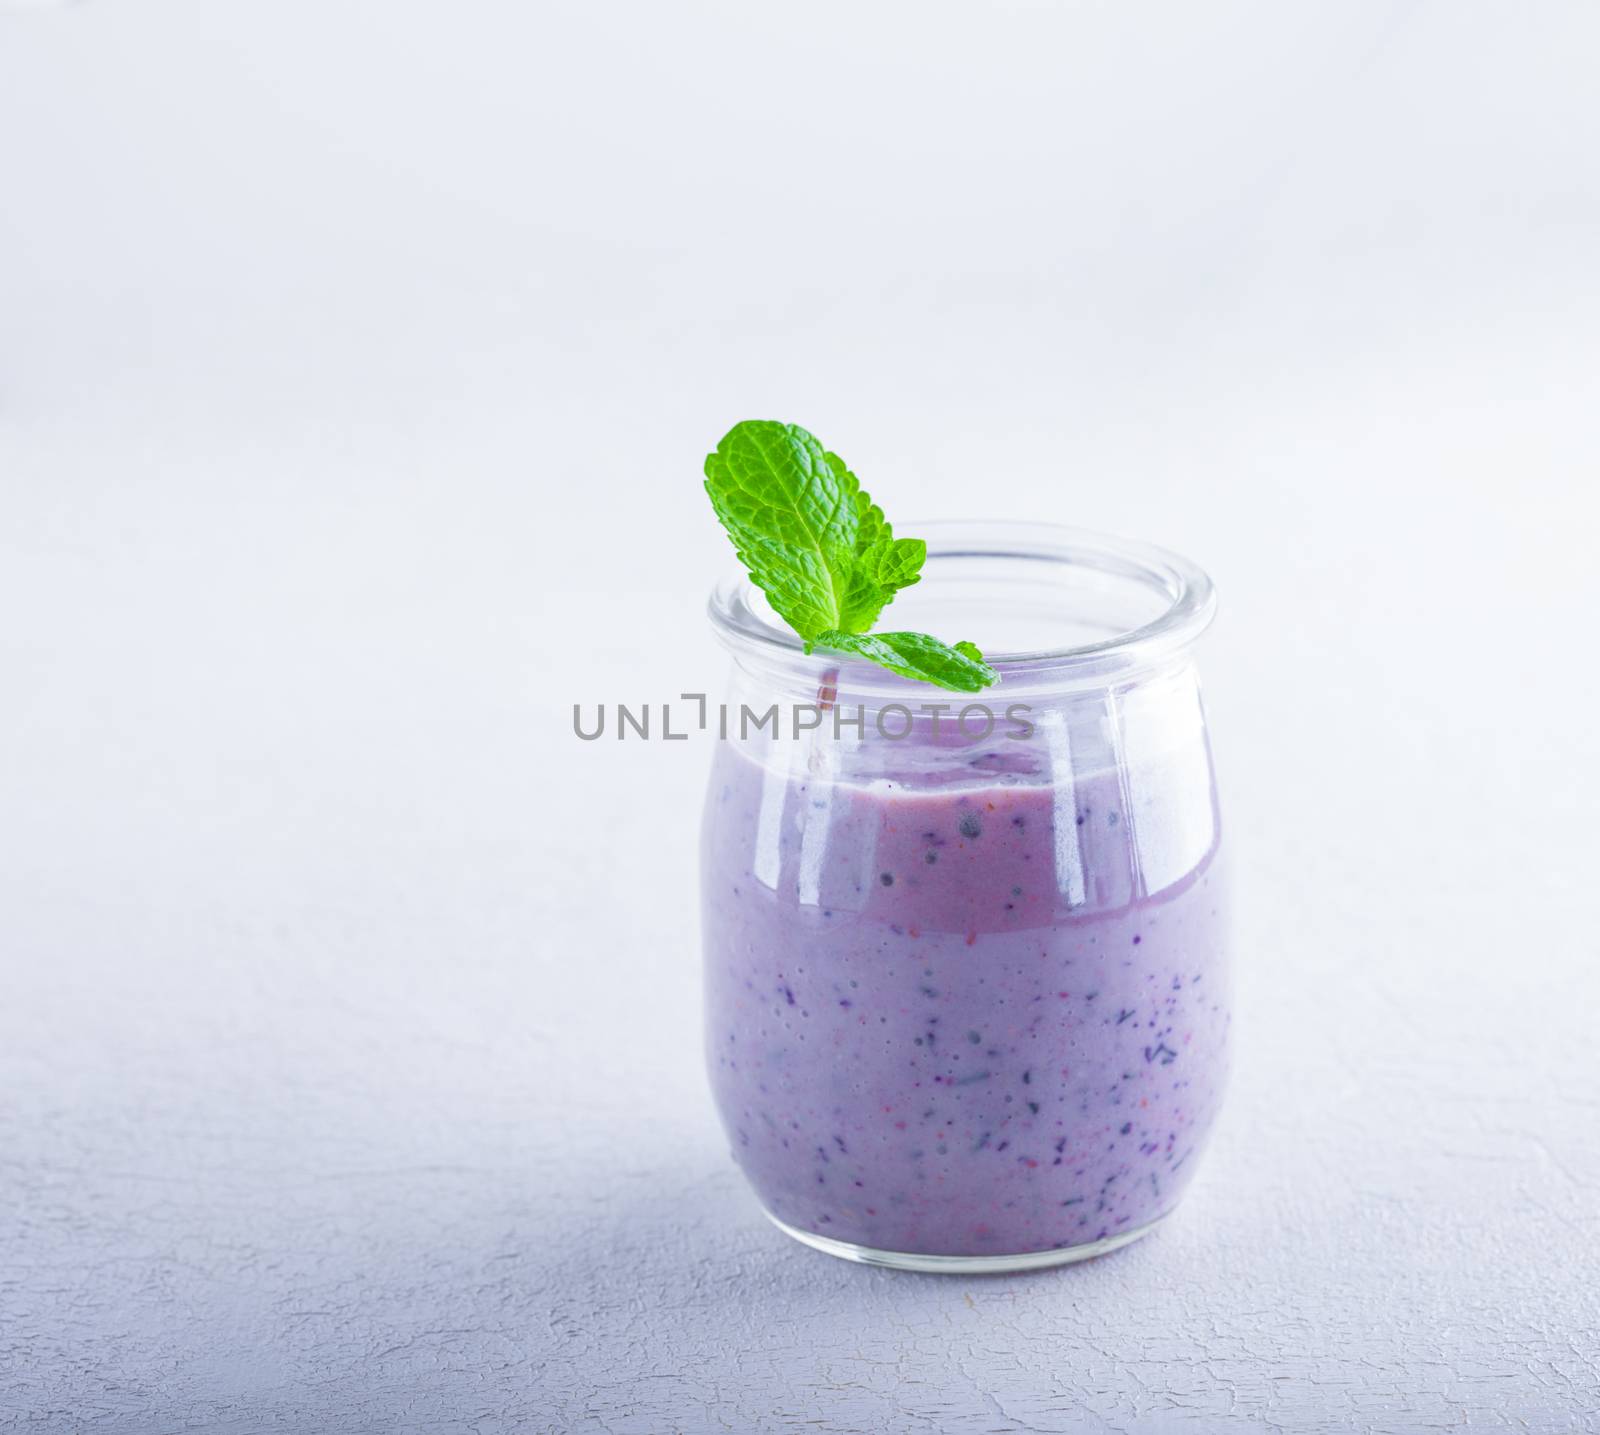 Delicious blueberry yoghurt smoothie by supercat67